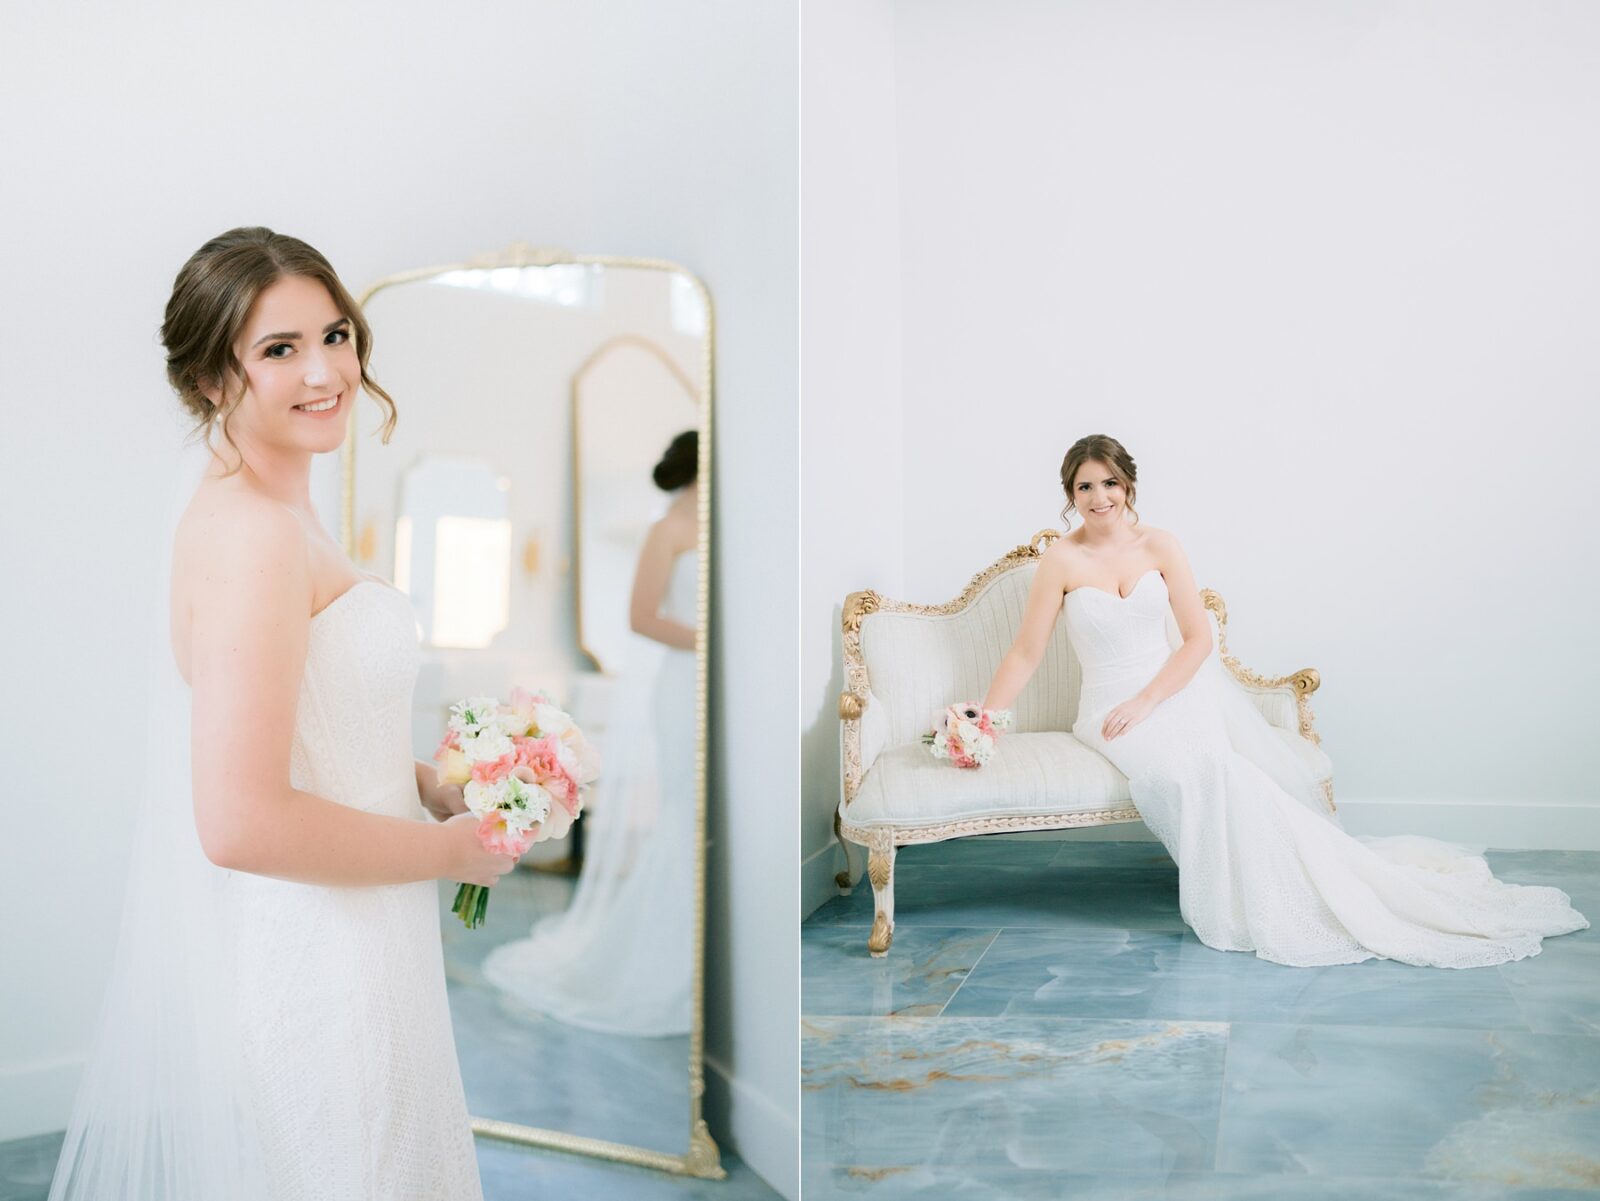 bride in front of mirror, bridal suite, bride sitting on couch, bridal session, bride photography, the videre estate, hill country wedding venue, wimberley wedding venue, austin wedding photography, tara paige weddings, 